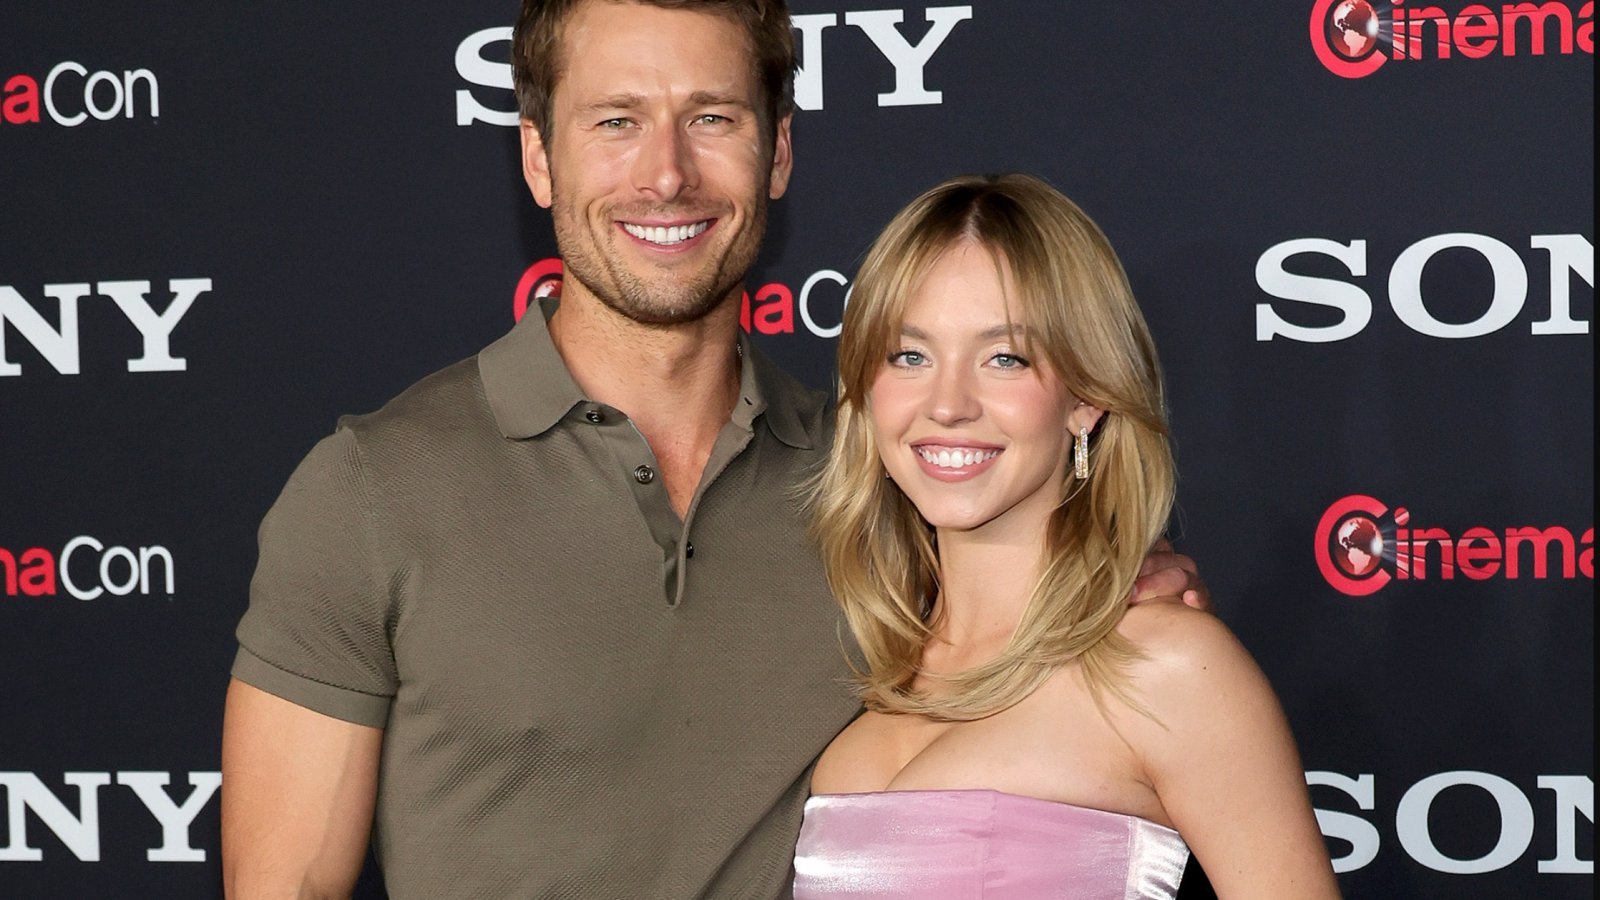 Sydney Sweeney and Glen Powell Flirting in Front of Audience at CinemaCon 2023: "I love when he calls me Top Gun"